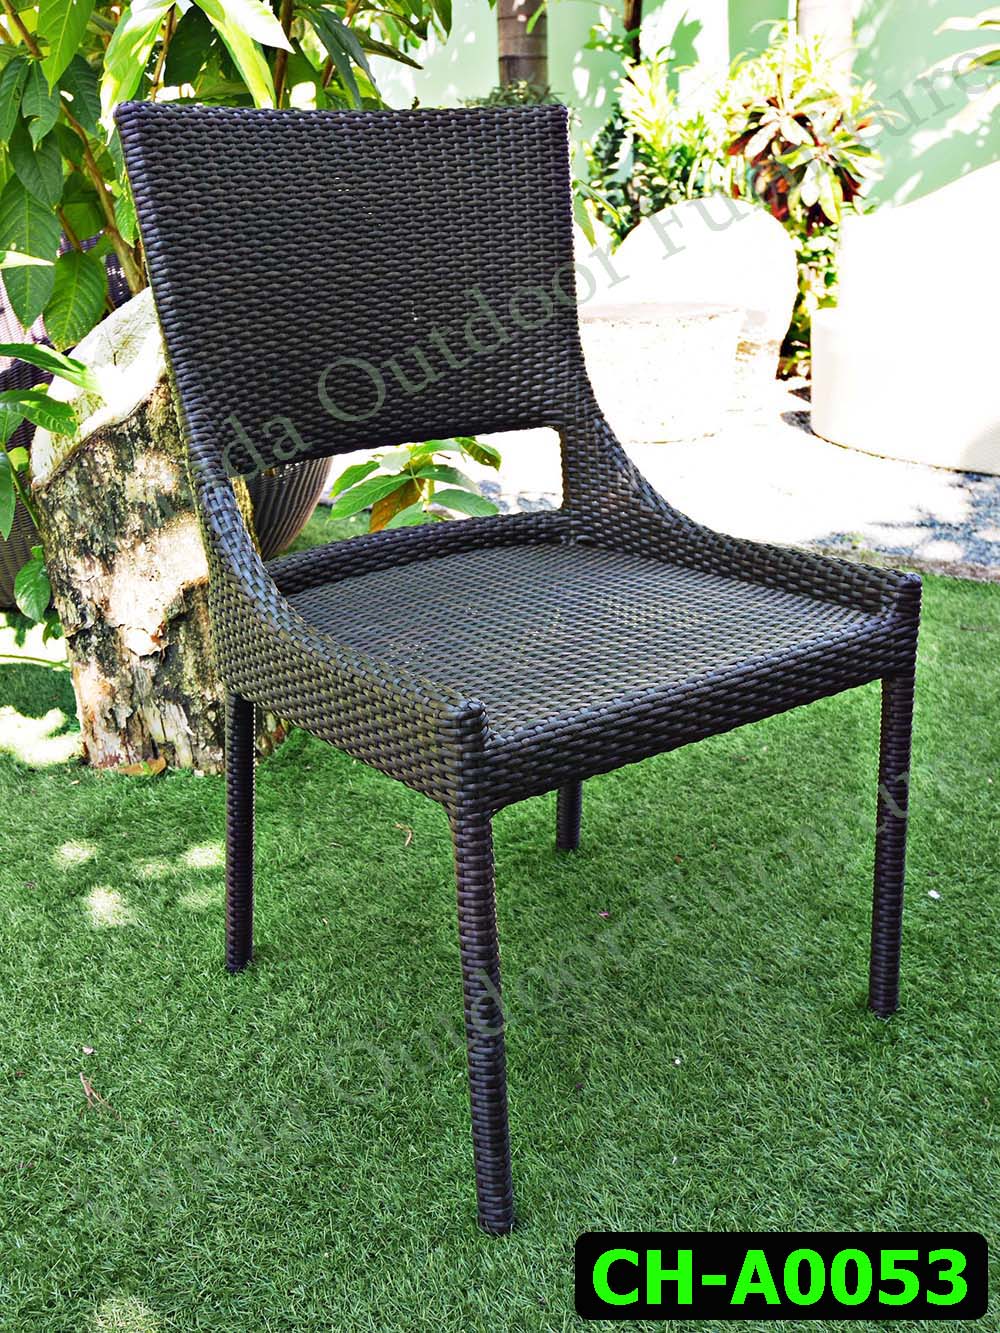 Rattan Chair Product code CH-A0053